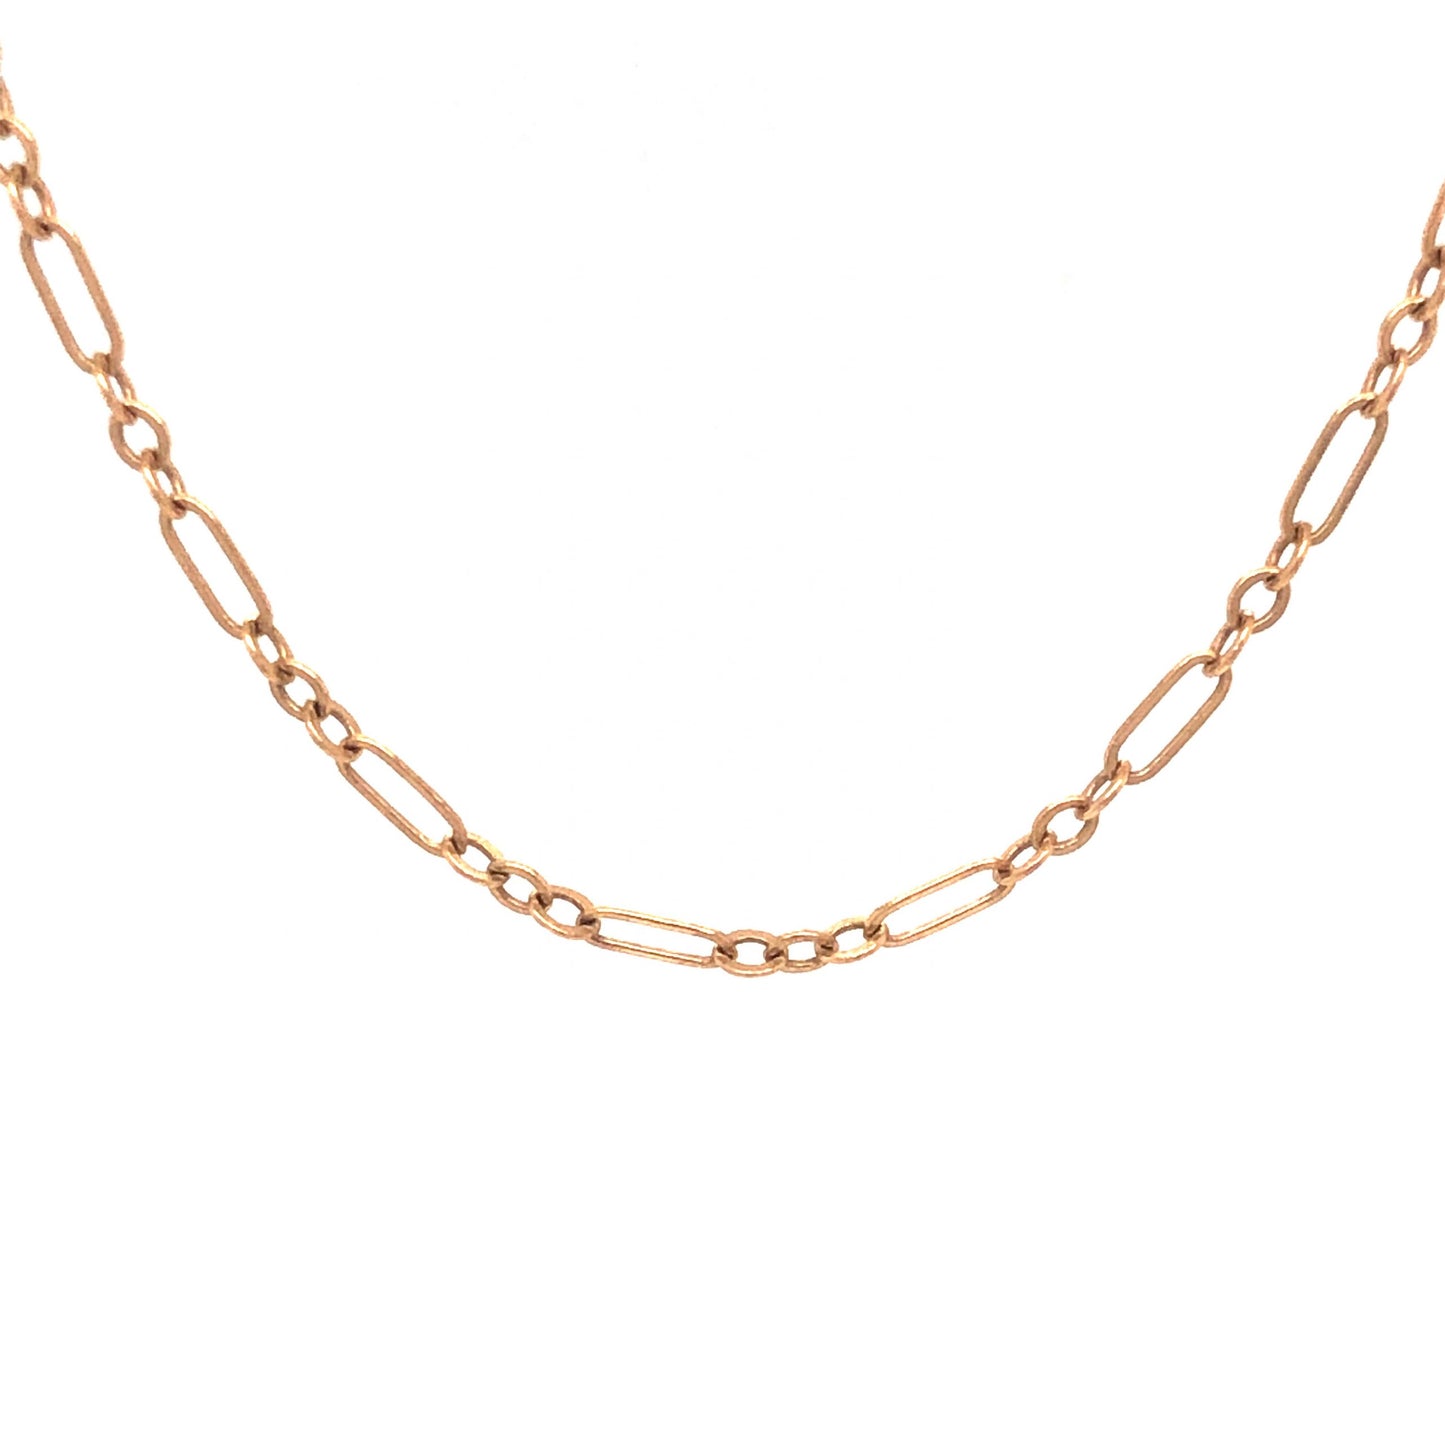 Art Deco Paperclip Chain Necklace in 14k Yellow Gold